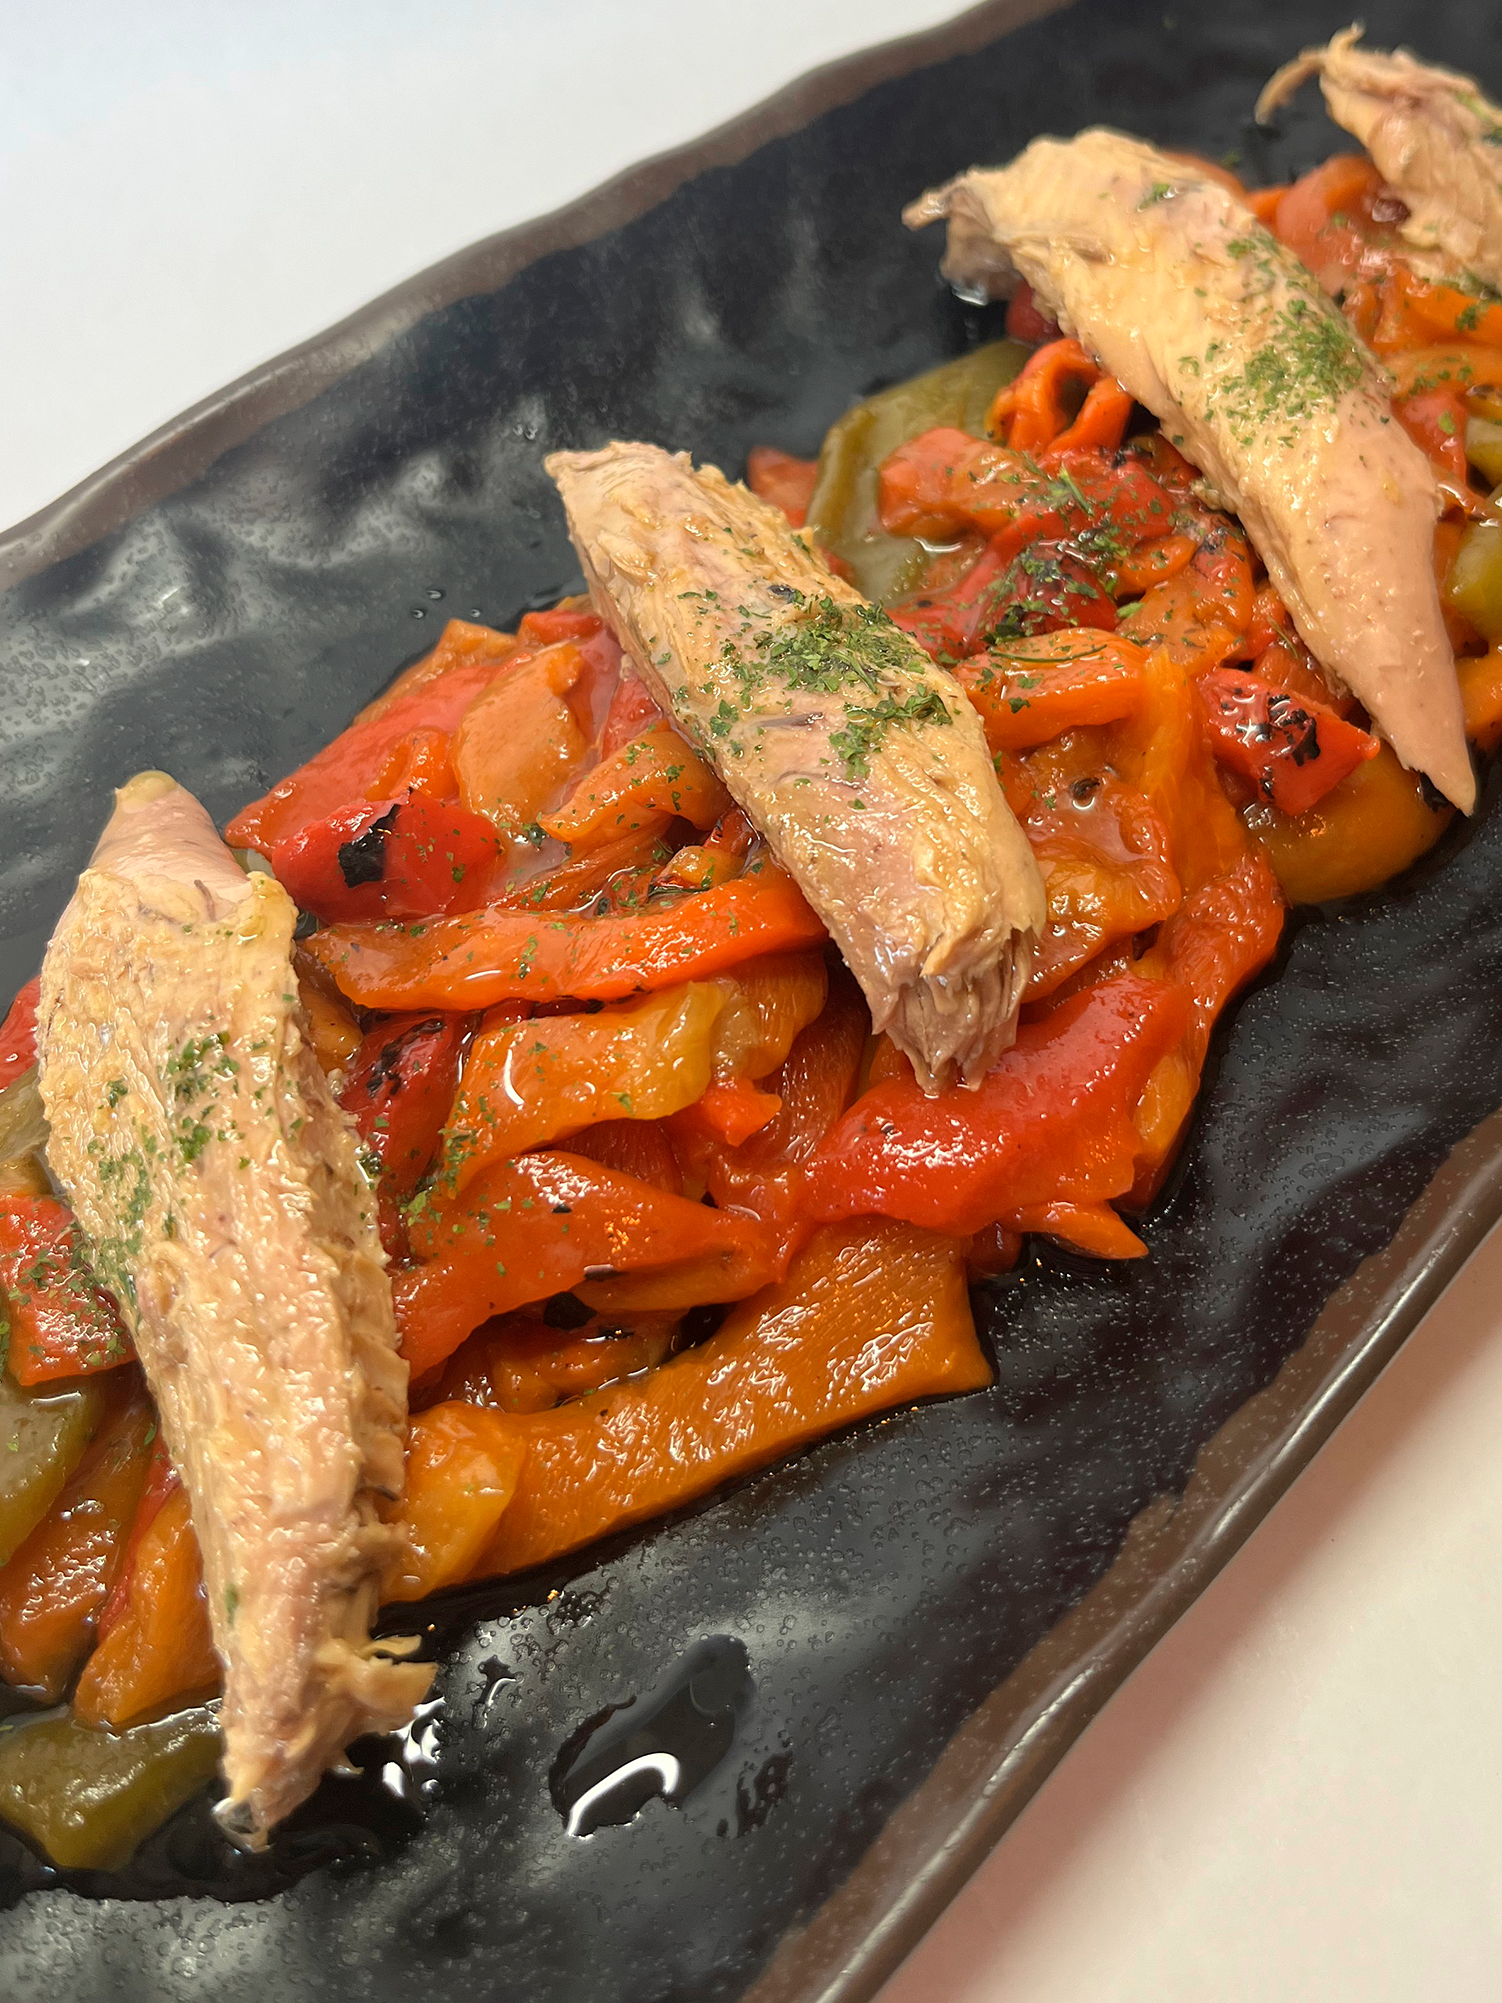 MELVA WITH ROASTED PEPPERS